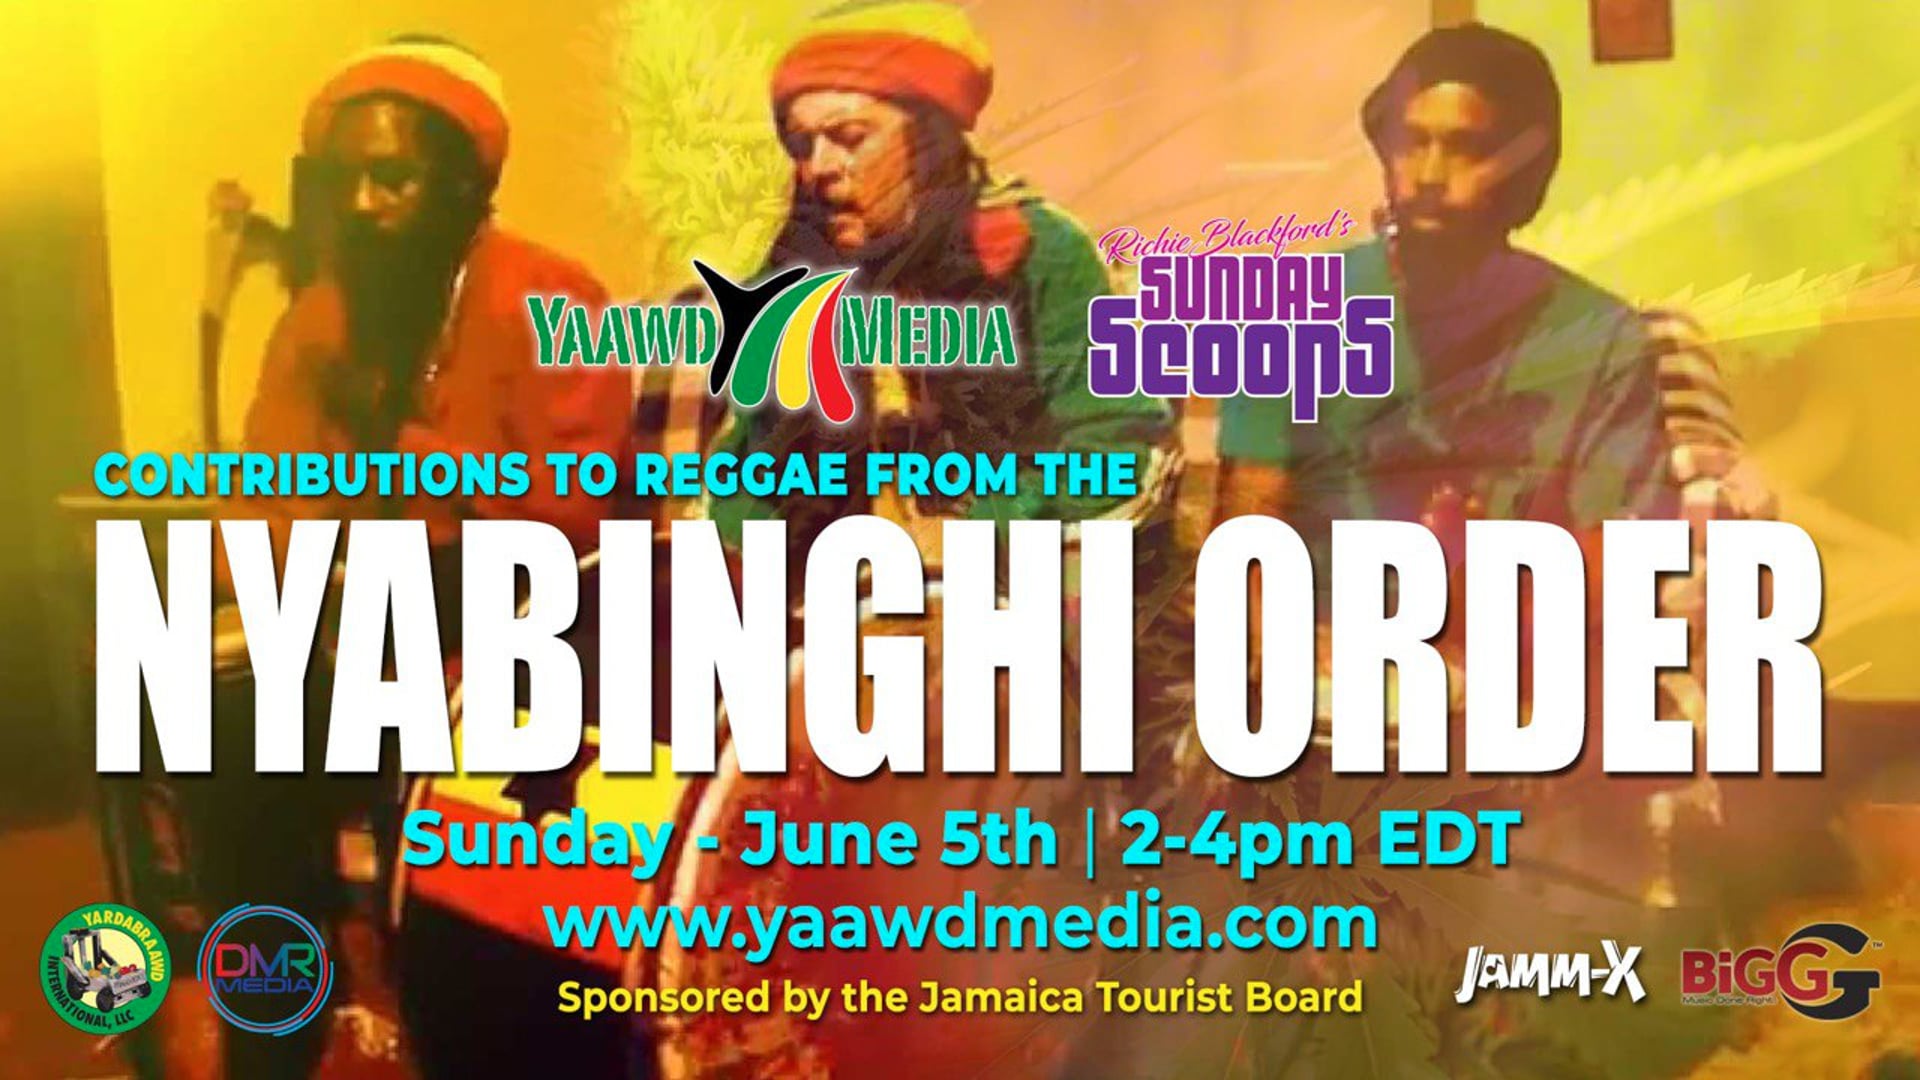 Sunday Scoops Contributions to Reggae From the Nyabinghi Order